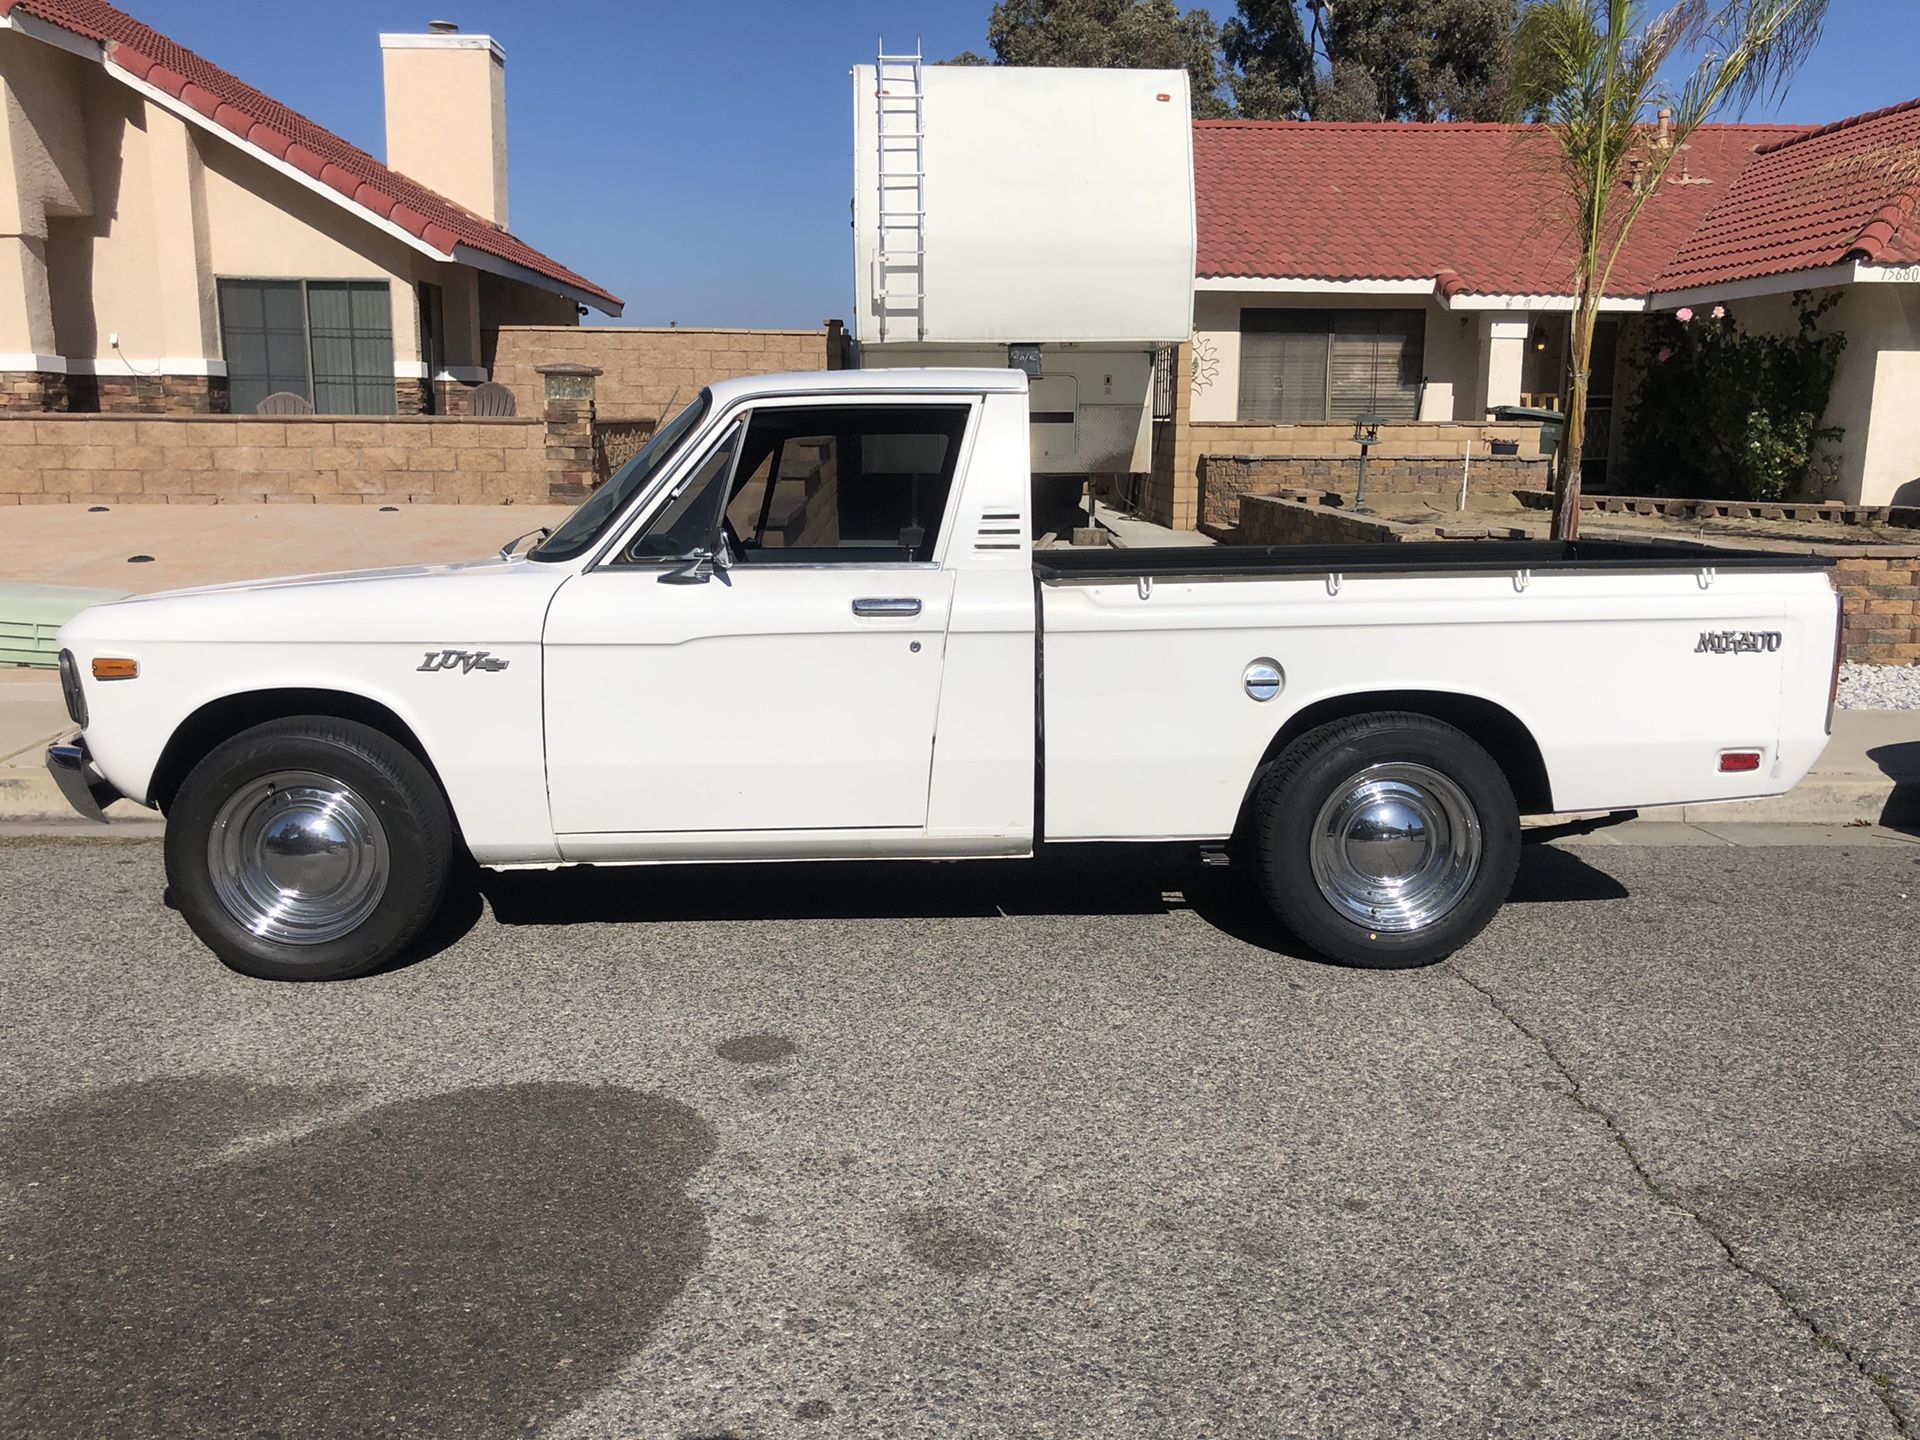 1977 Chevy luv